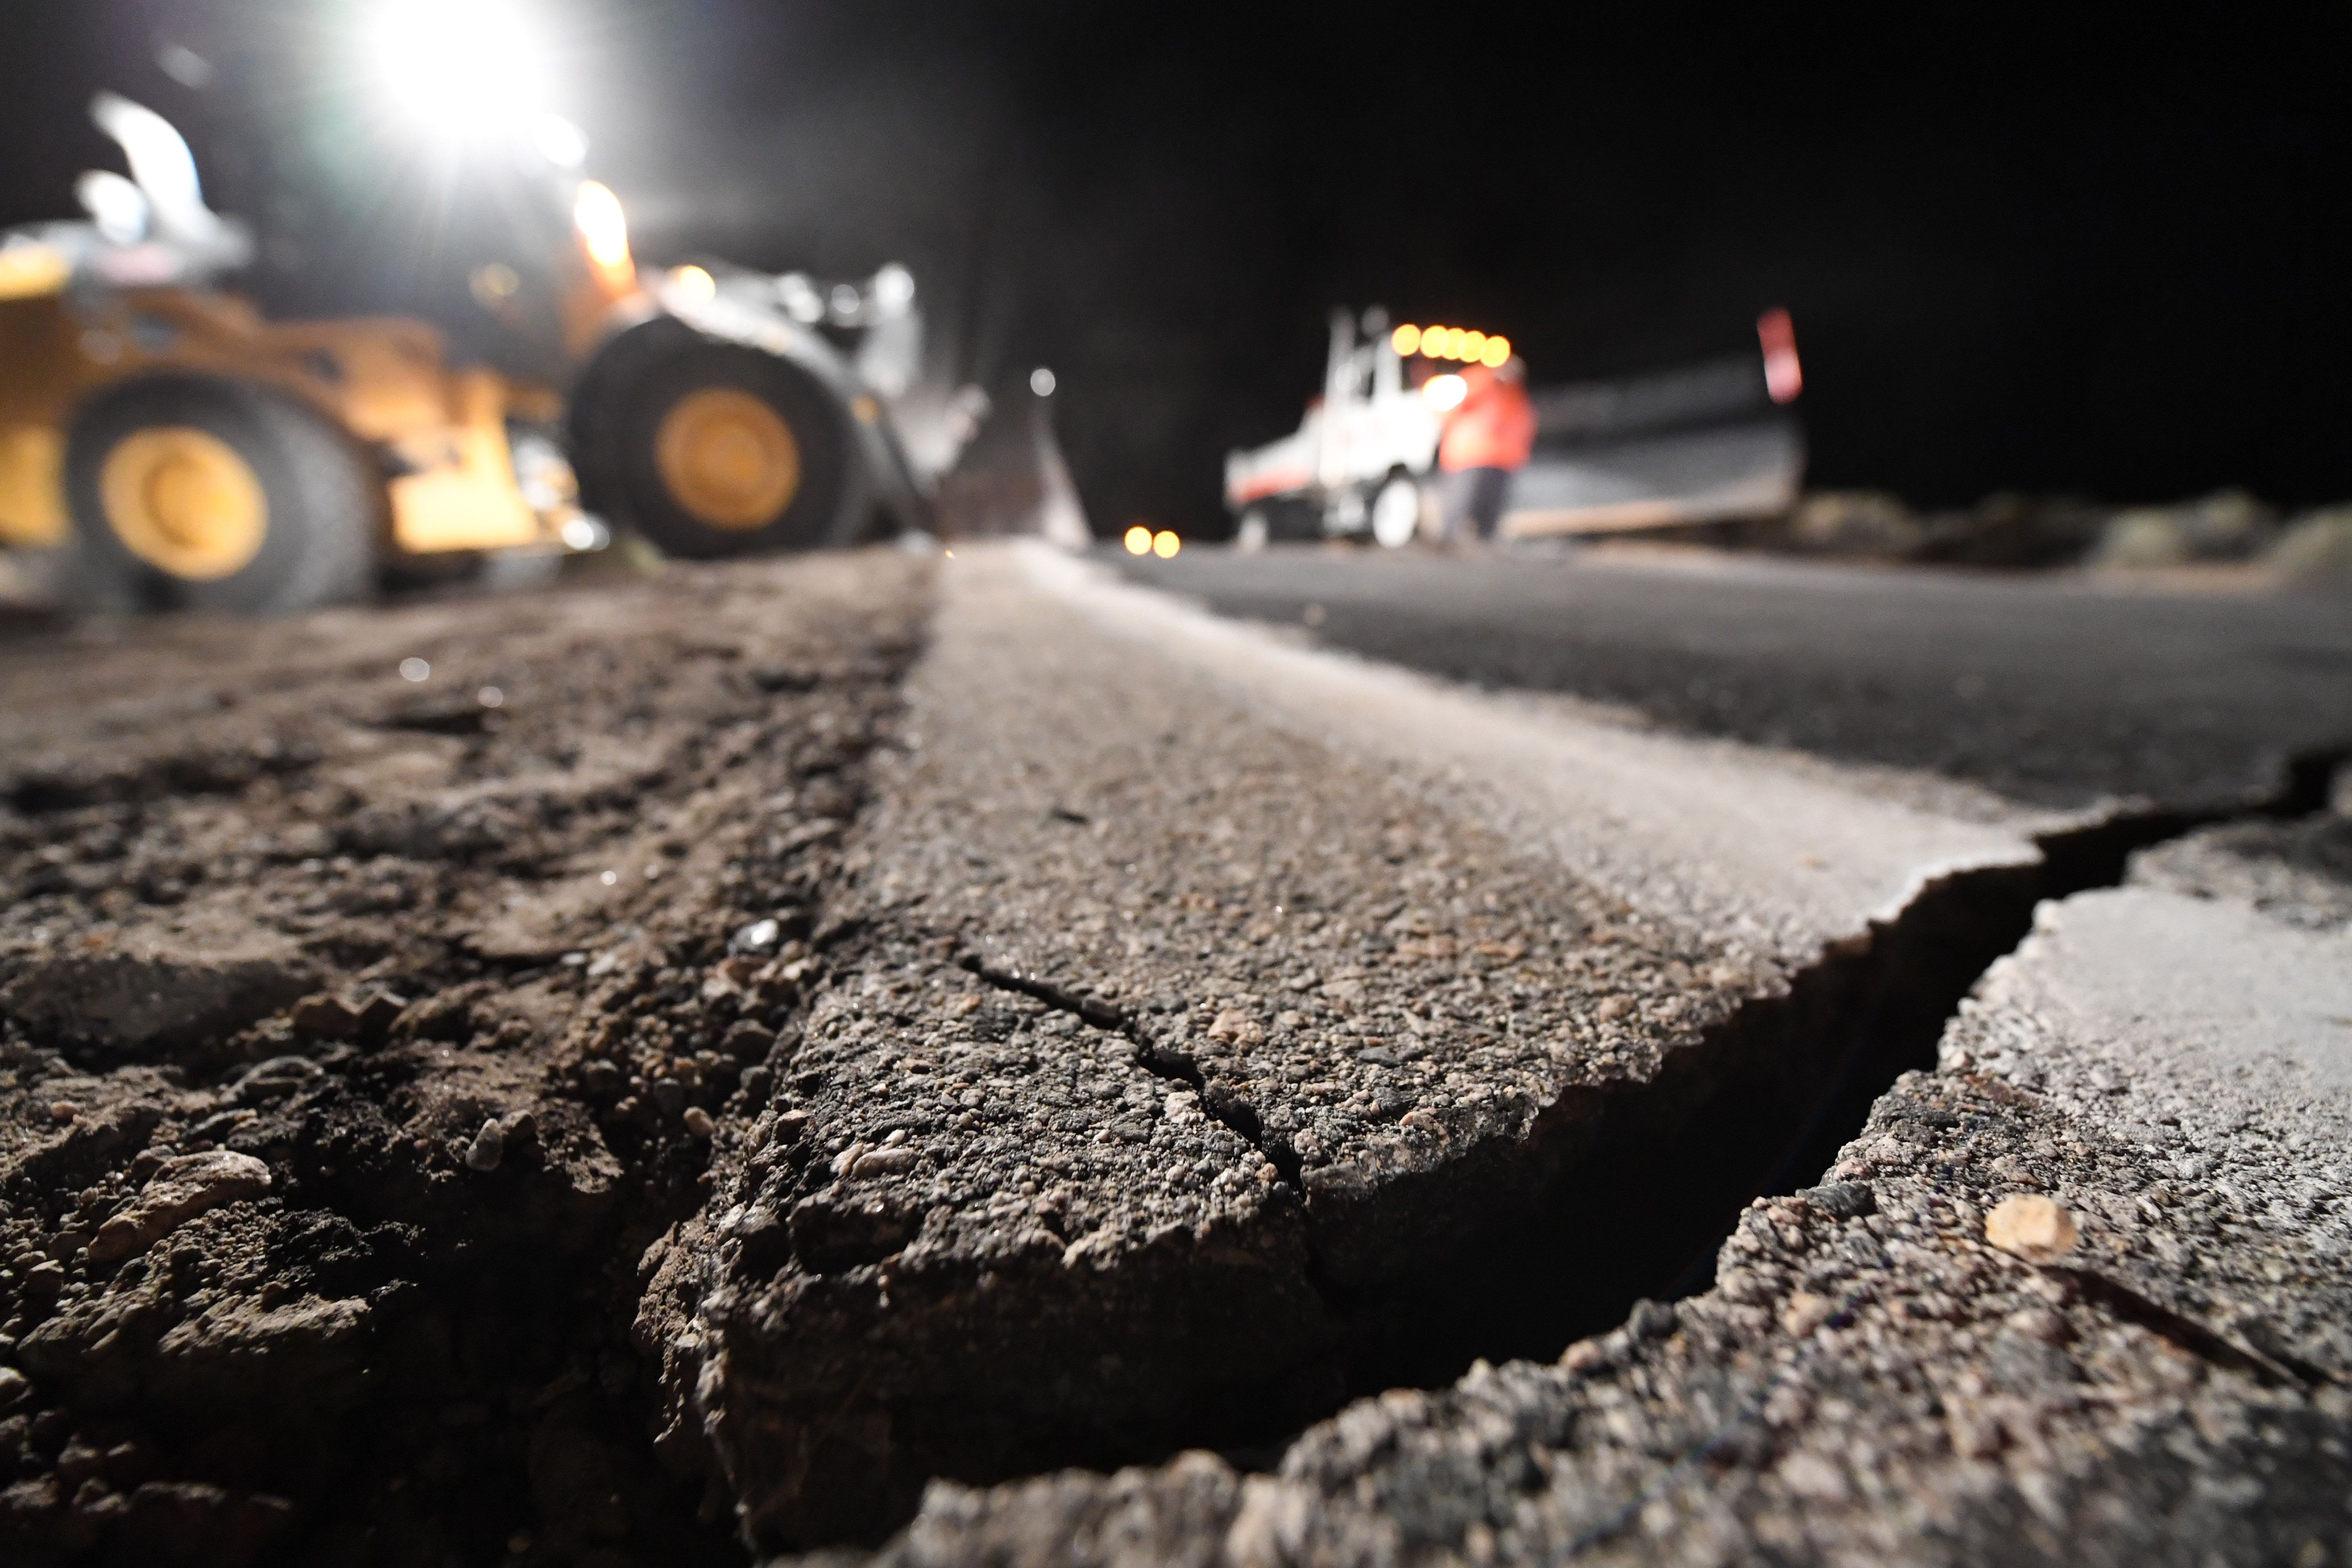 Highway workers repair a hole that opened in the road as a result of the July 5, 2019 earthquake, in Ridgecrest, California, about 150 miles (241km) north of Los Angeles, early in the morning on July 6, 2019. - Southern California was hit by its largest earthquake in two decades on July 5, a 7.1-magnitude tremor that rattled residents who were already reeling from another strong quake a day earlier. (Photo by Robyn Beck / AFP) (Photo credit should read ROBYN BECK/AFP/Getty Images)